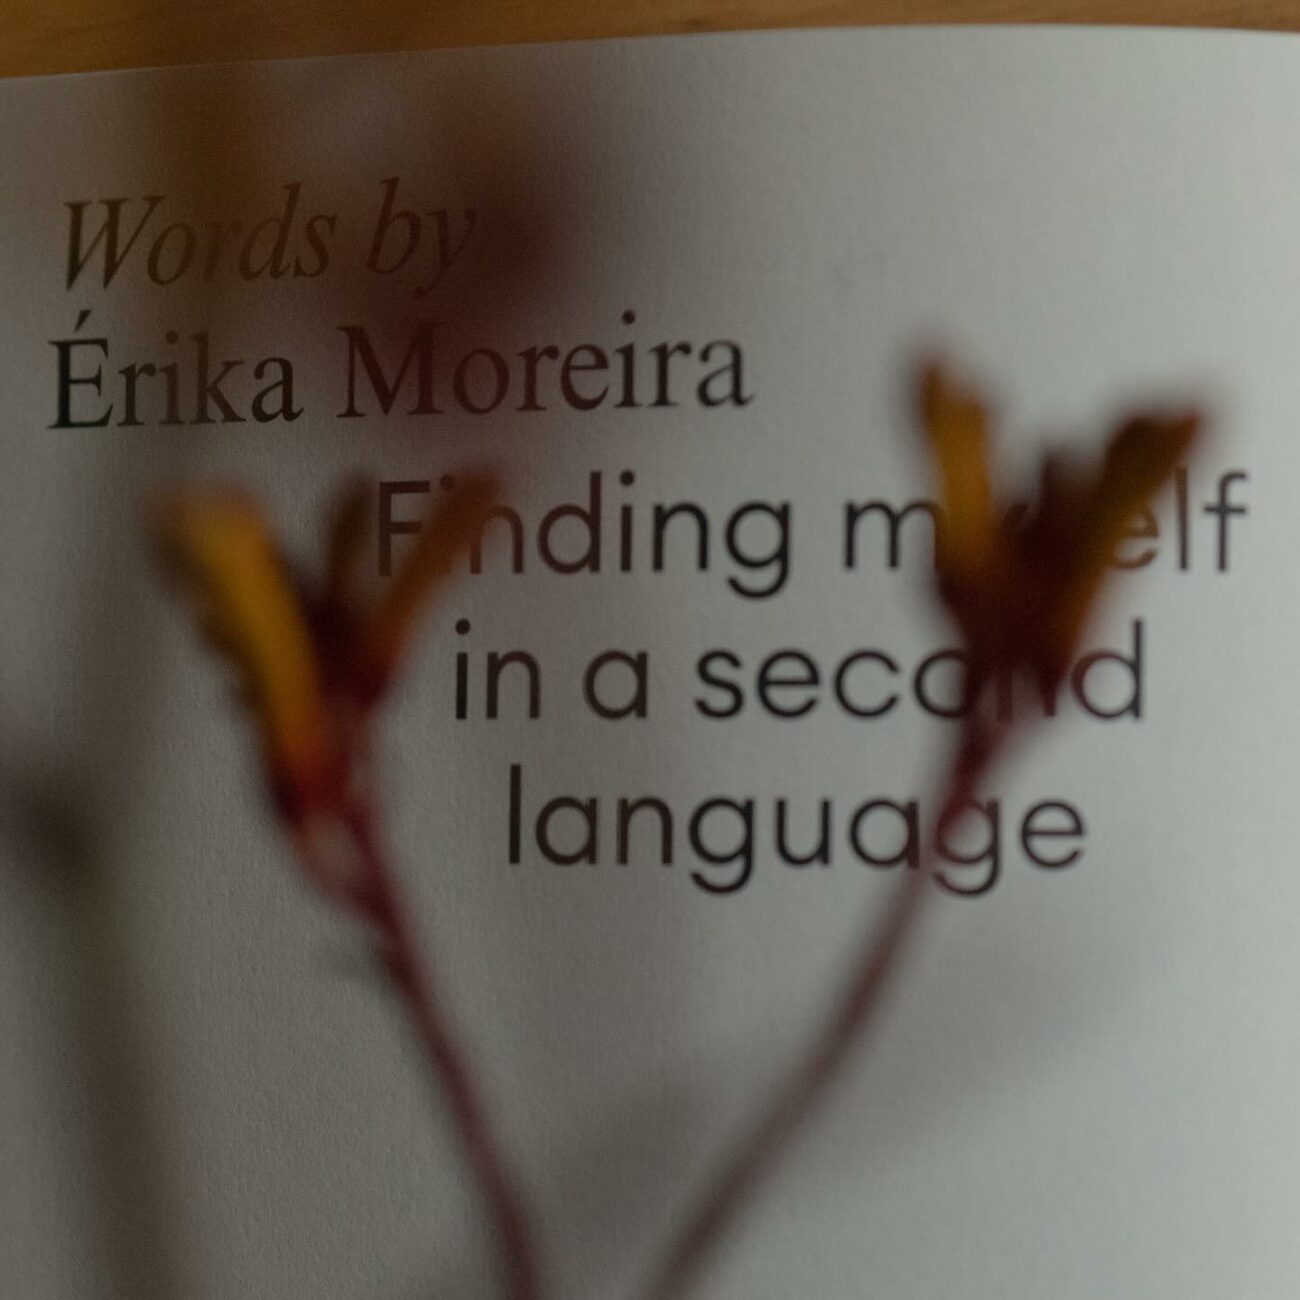 Personal Project: Finding myself in a second language